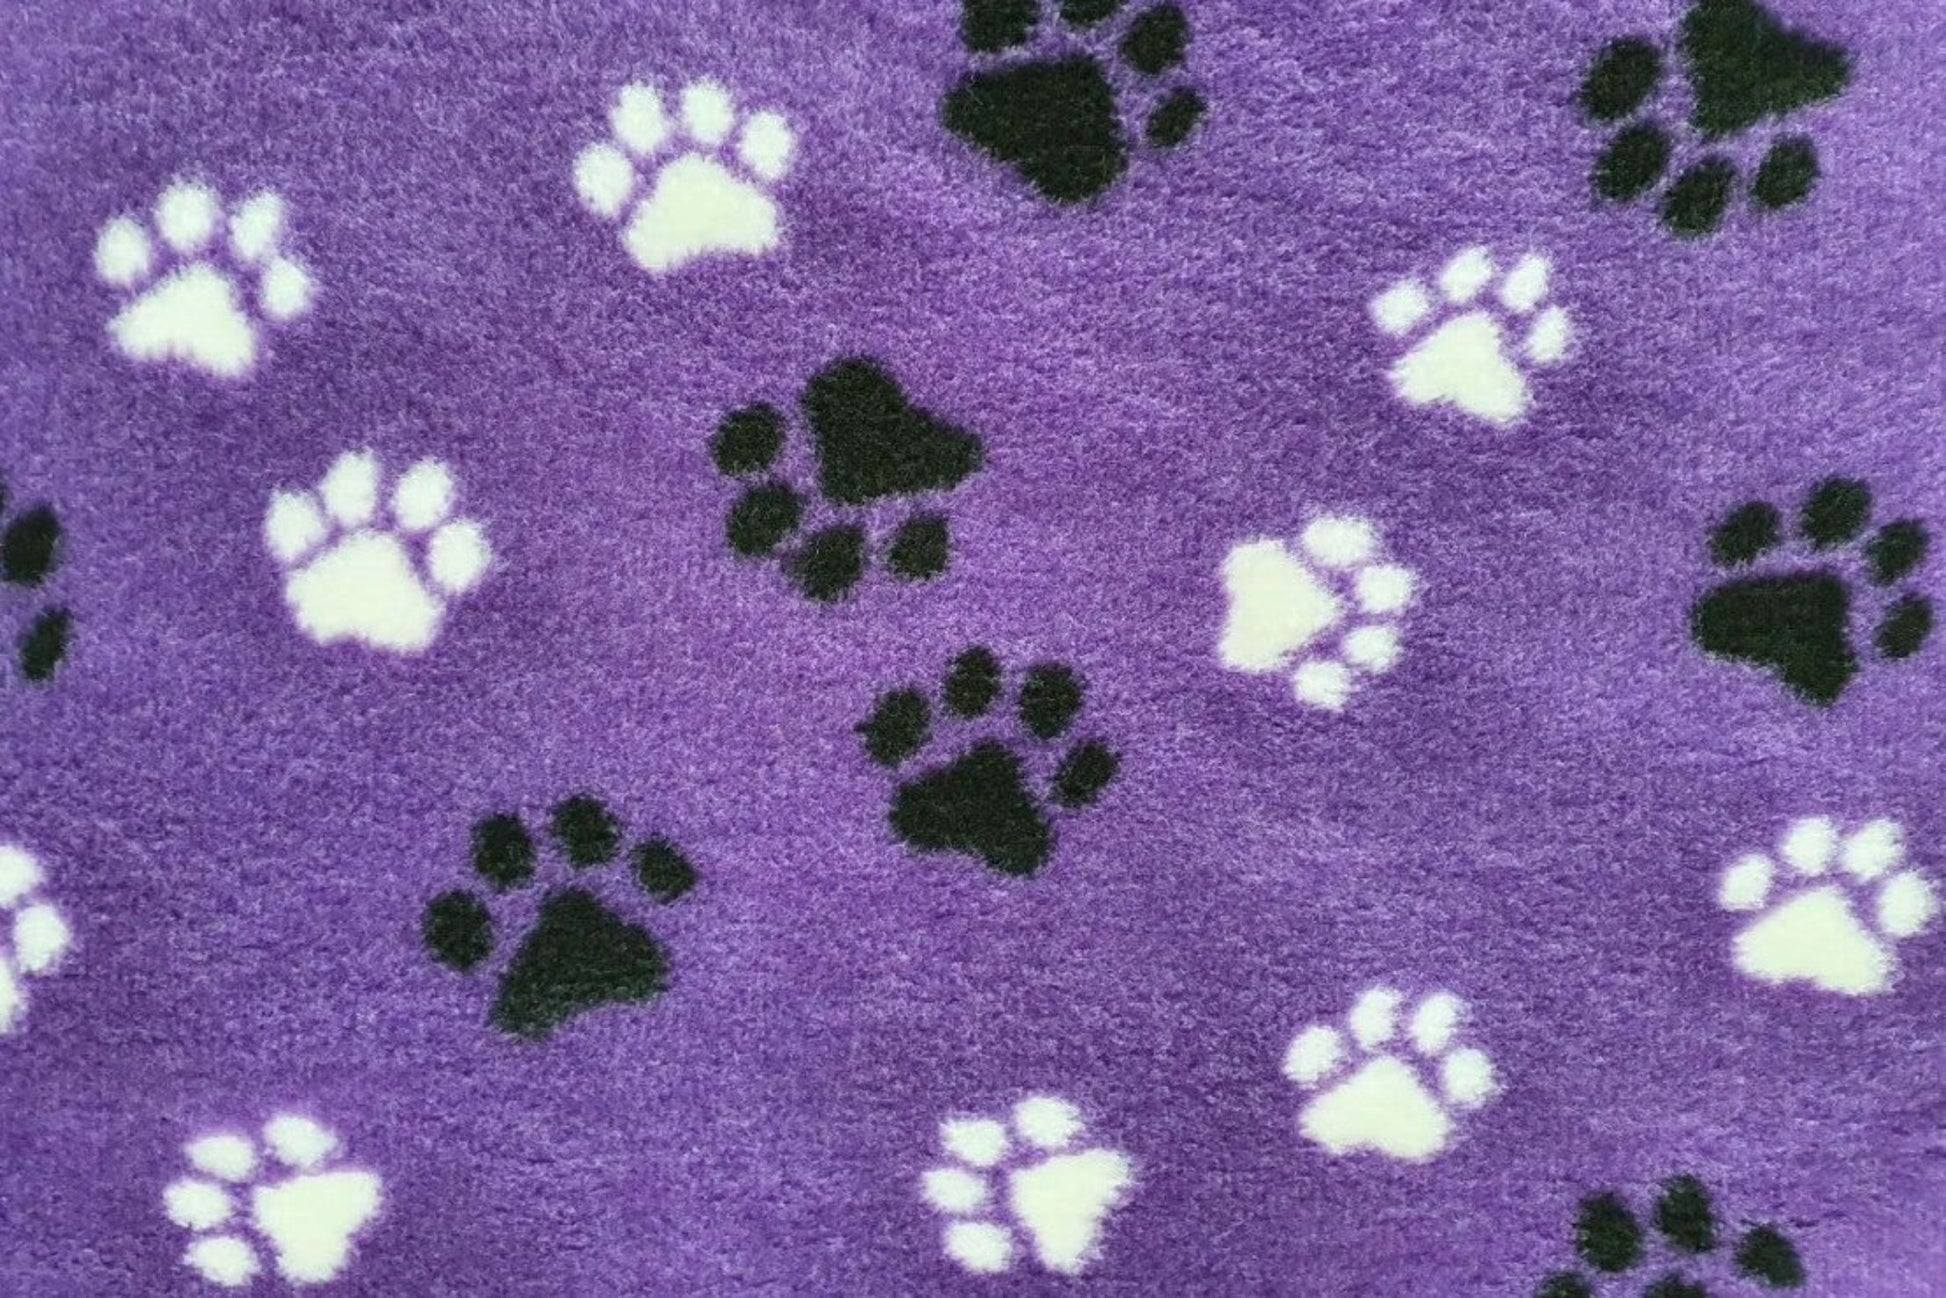 Vet Bed - Green Backed - Purple with Black and White Paws